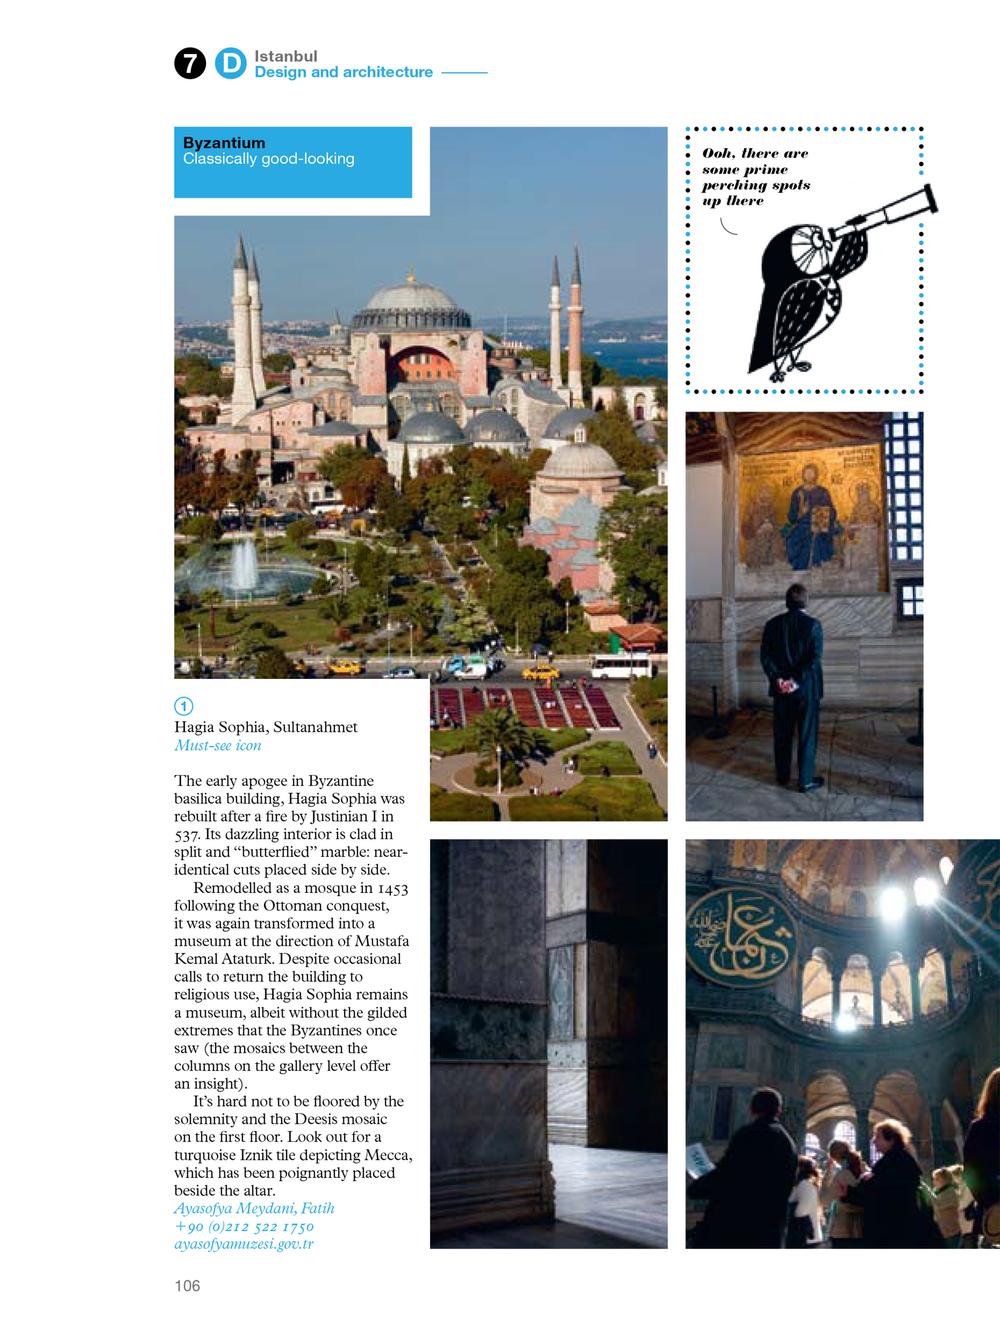 Travel Guide to Istanbul